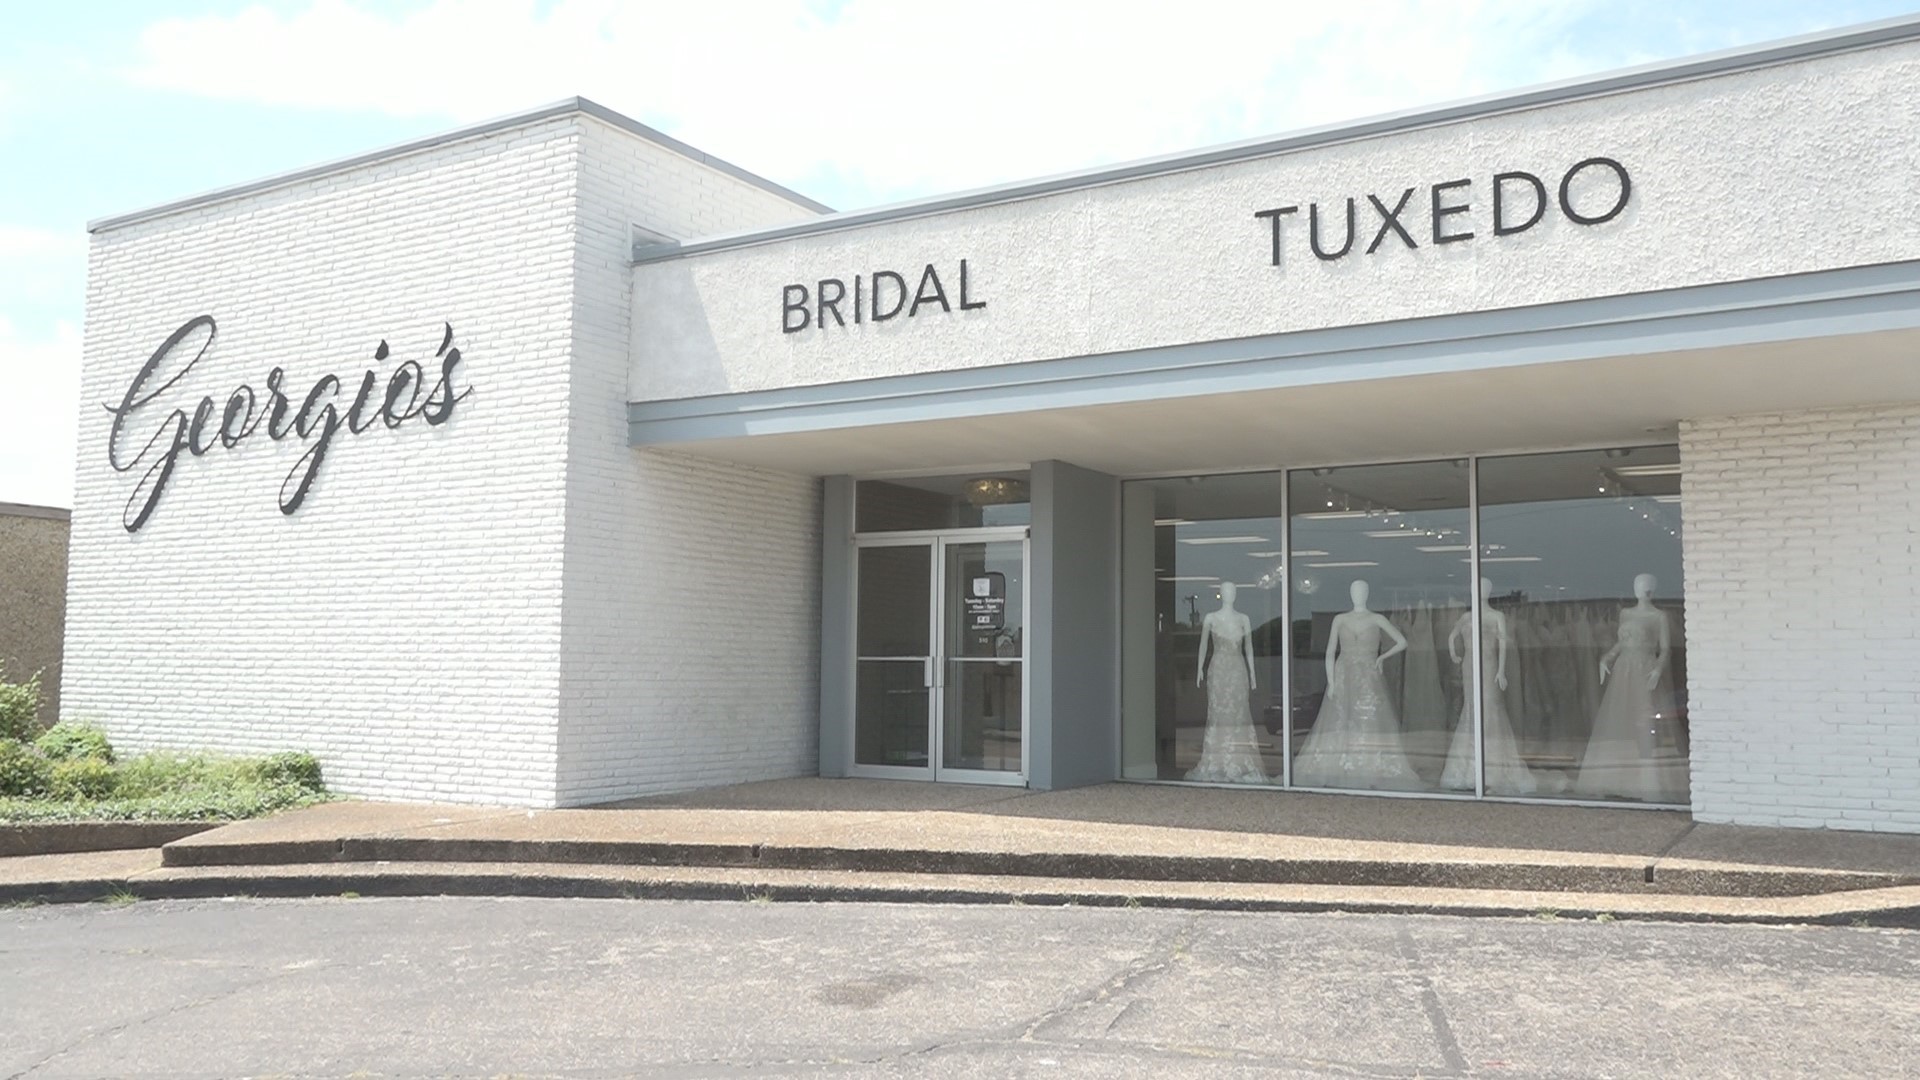 The shop is partnering with Brides Across America to provide free wedding dresses to military women, first responders, and frontline healthcare workers in August.